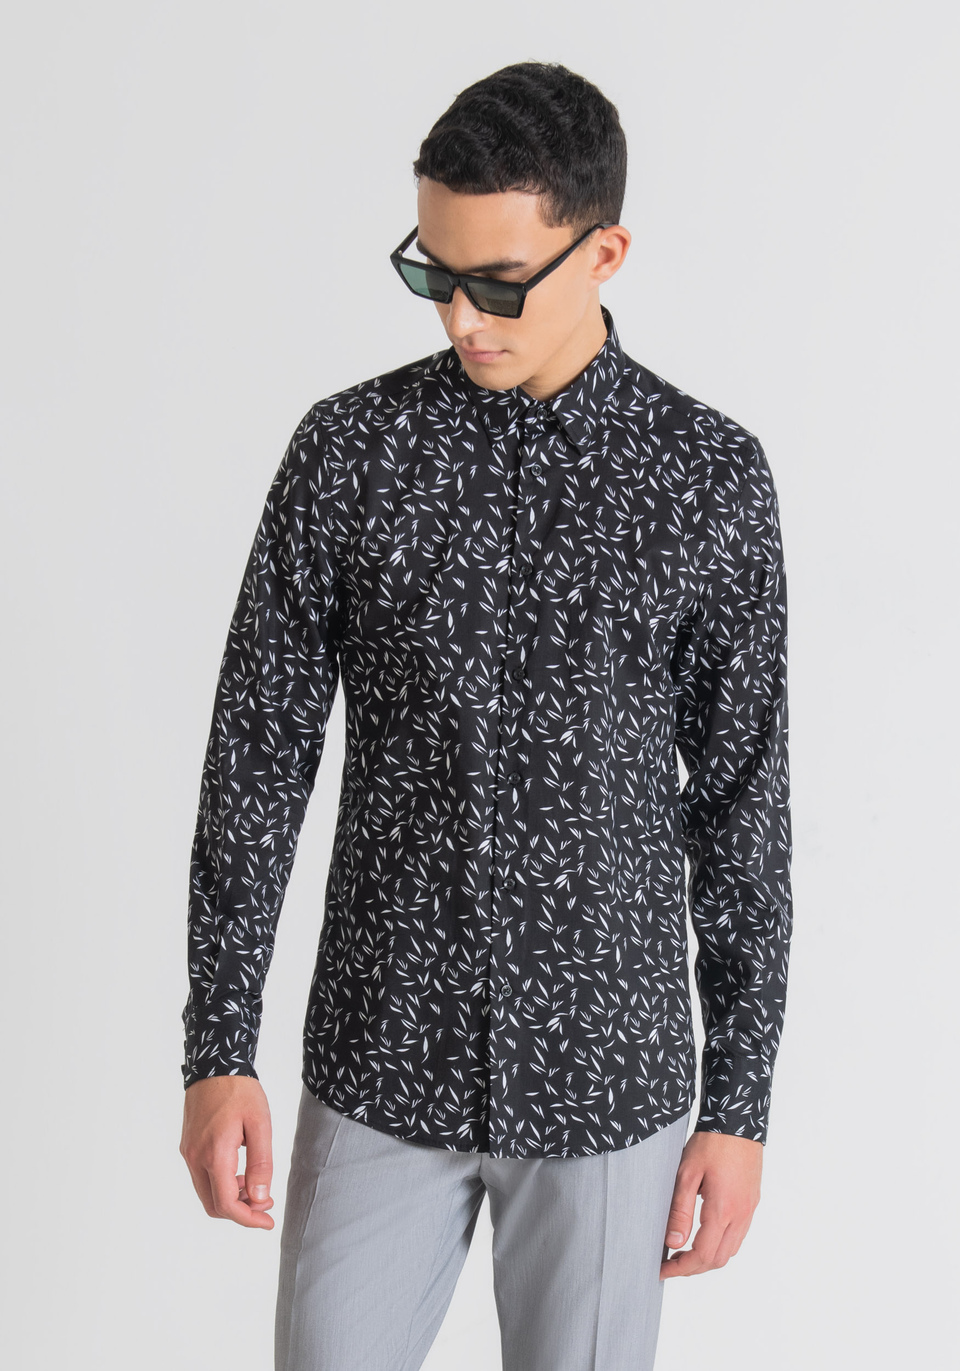 "NAPOLI" SLIM-FIT SHIRT IN SOFT-TOUCH COTTON WITH ALL-OVER LEAF PRINT - Antony Morato Online Shop